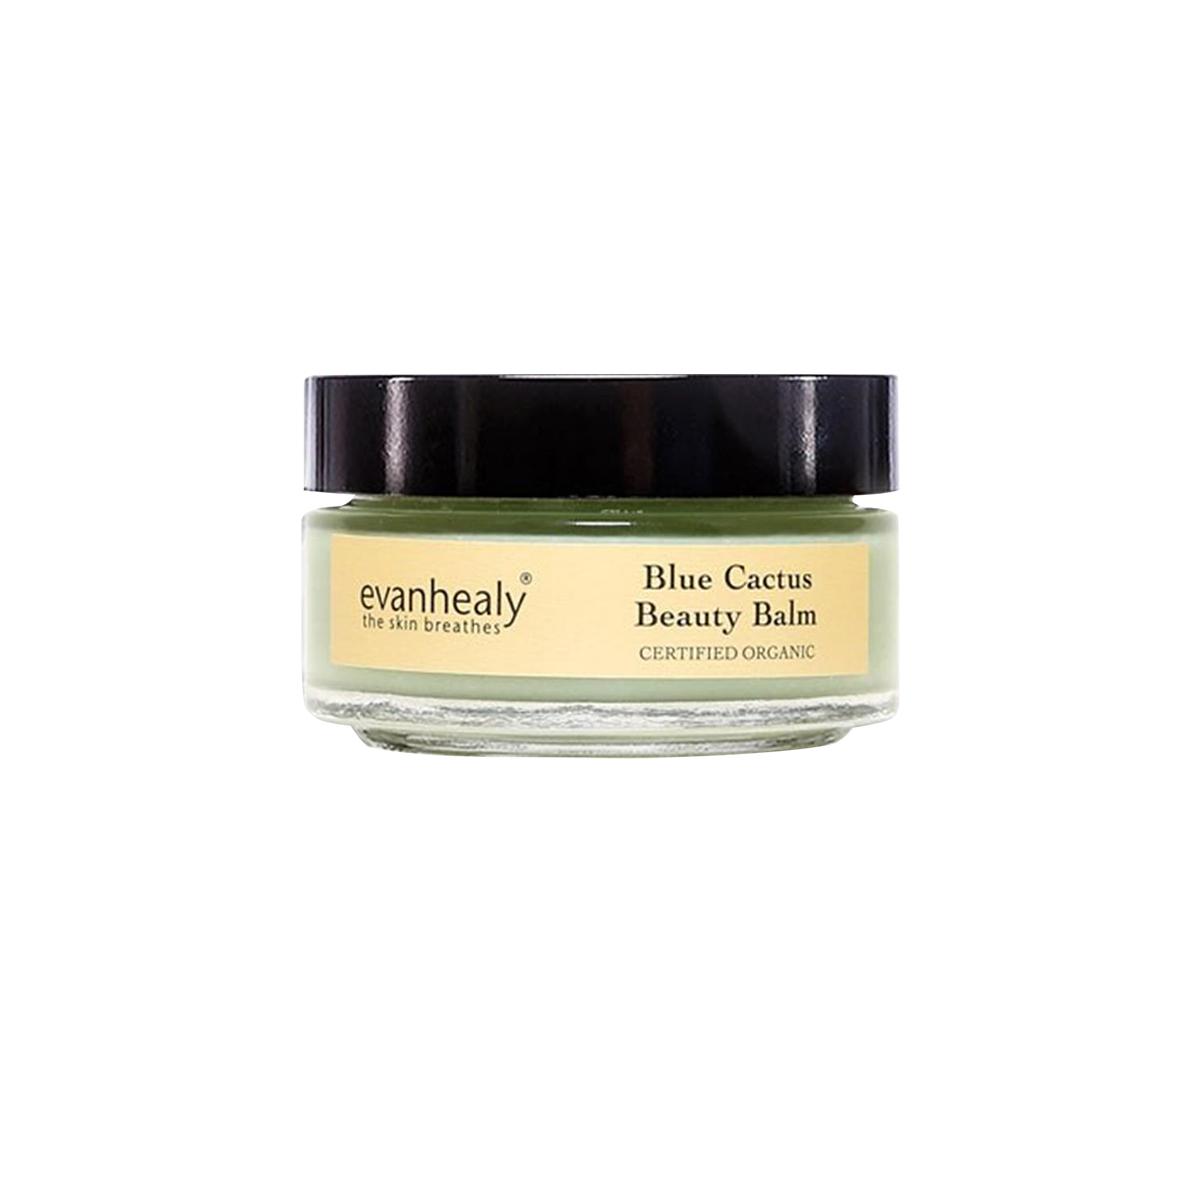 Primary image of Blue Cactus Beauty Balm